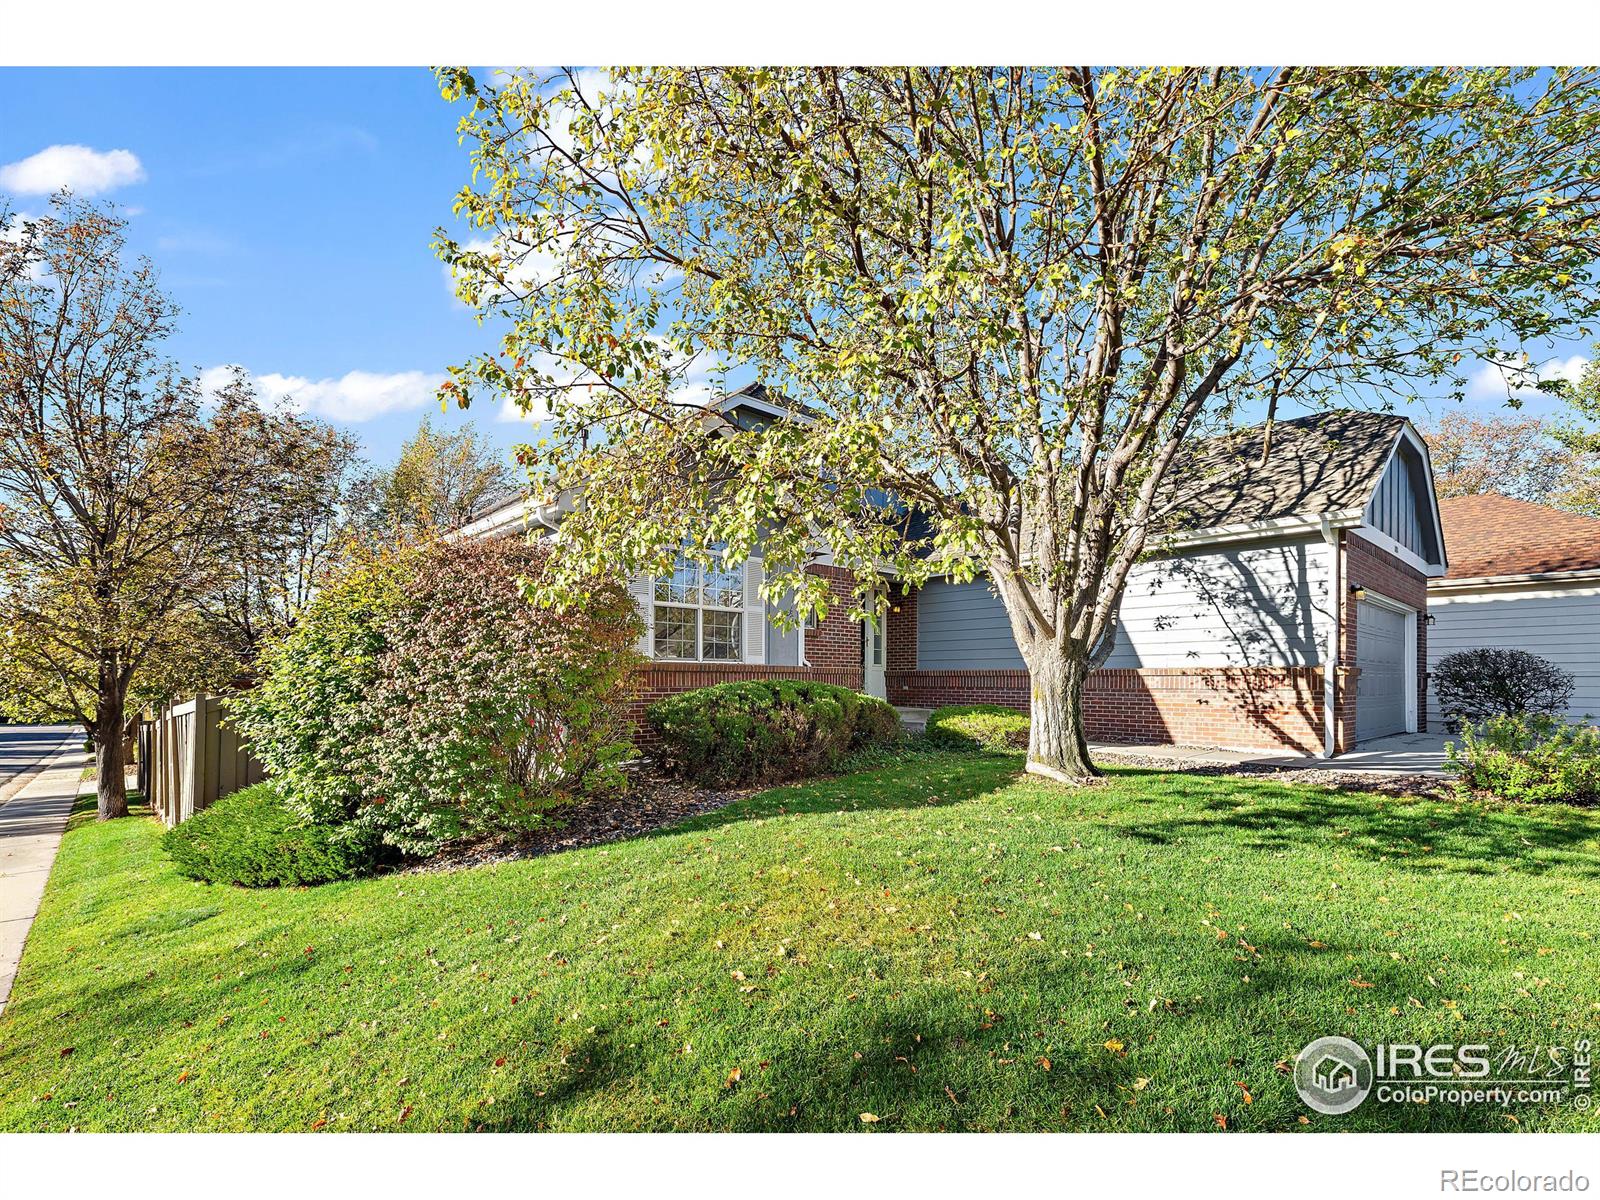 7128 w arlington way, Littleton sold home. Closed on 2024-01-12 for $805,000.